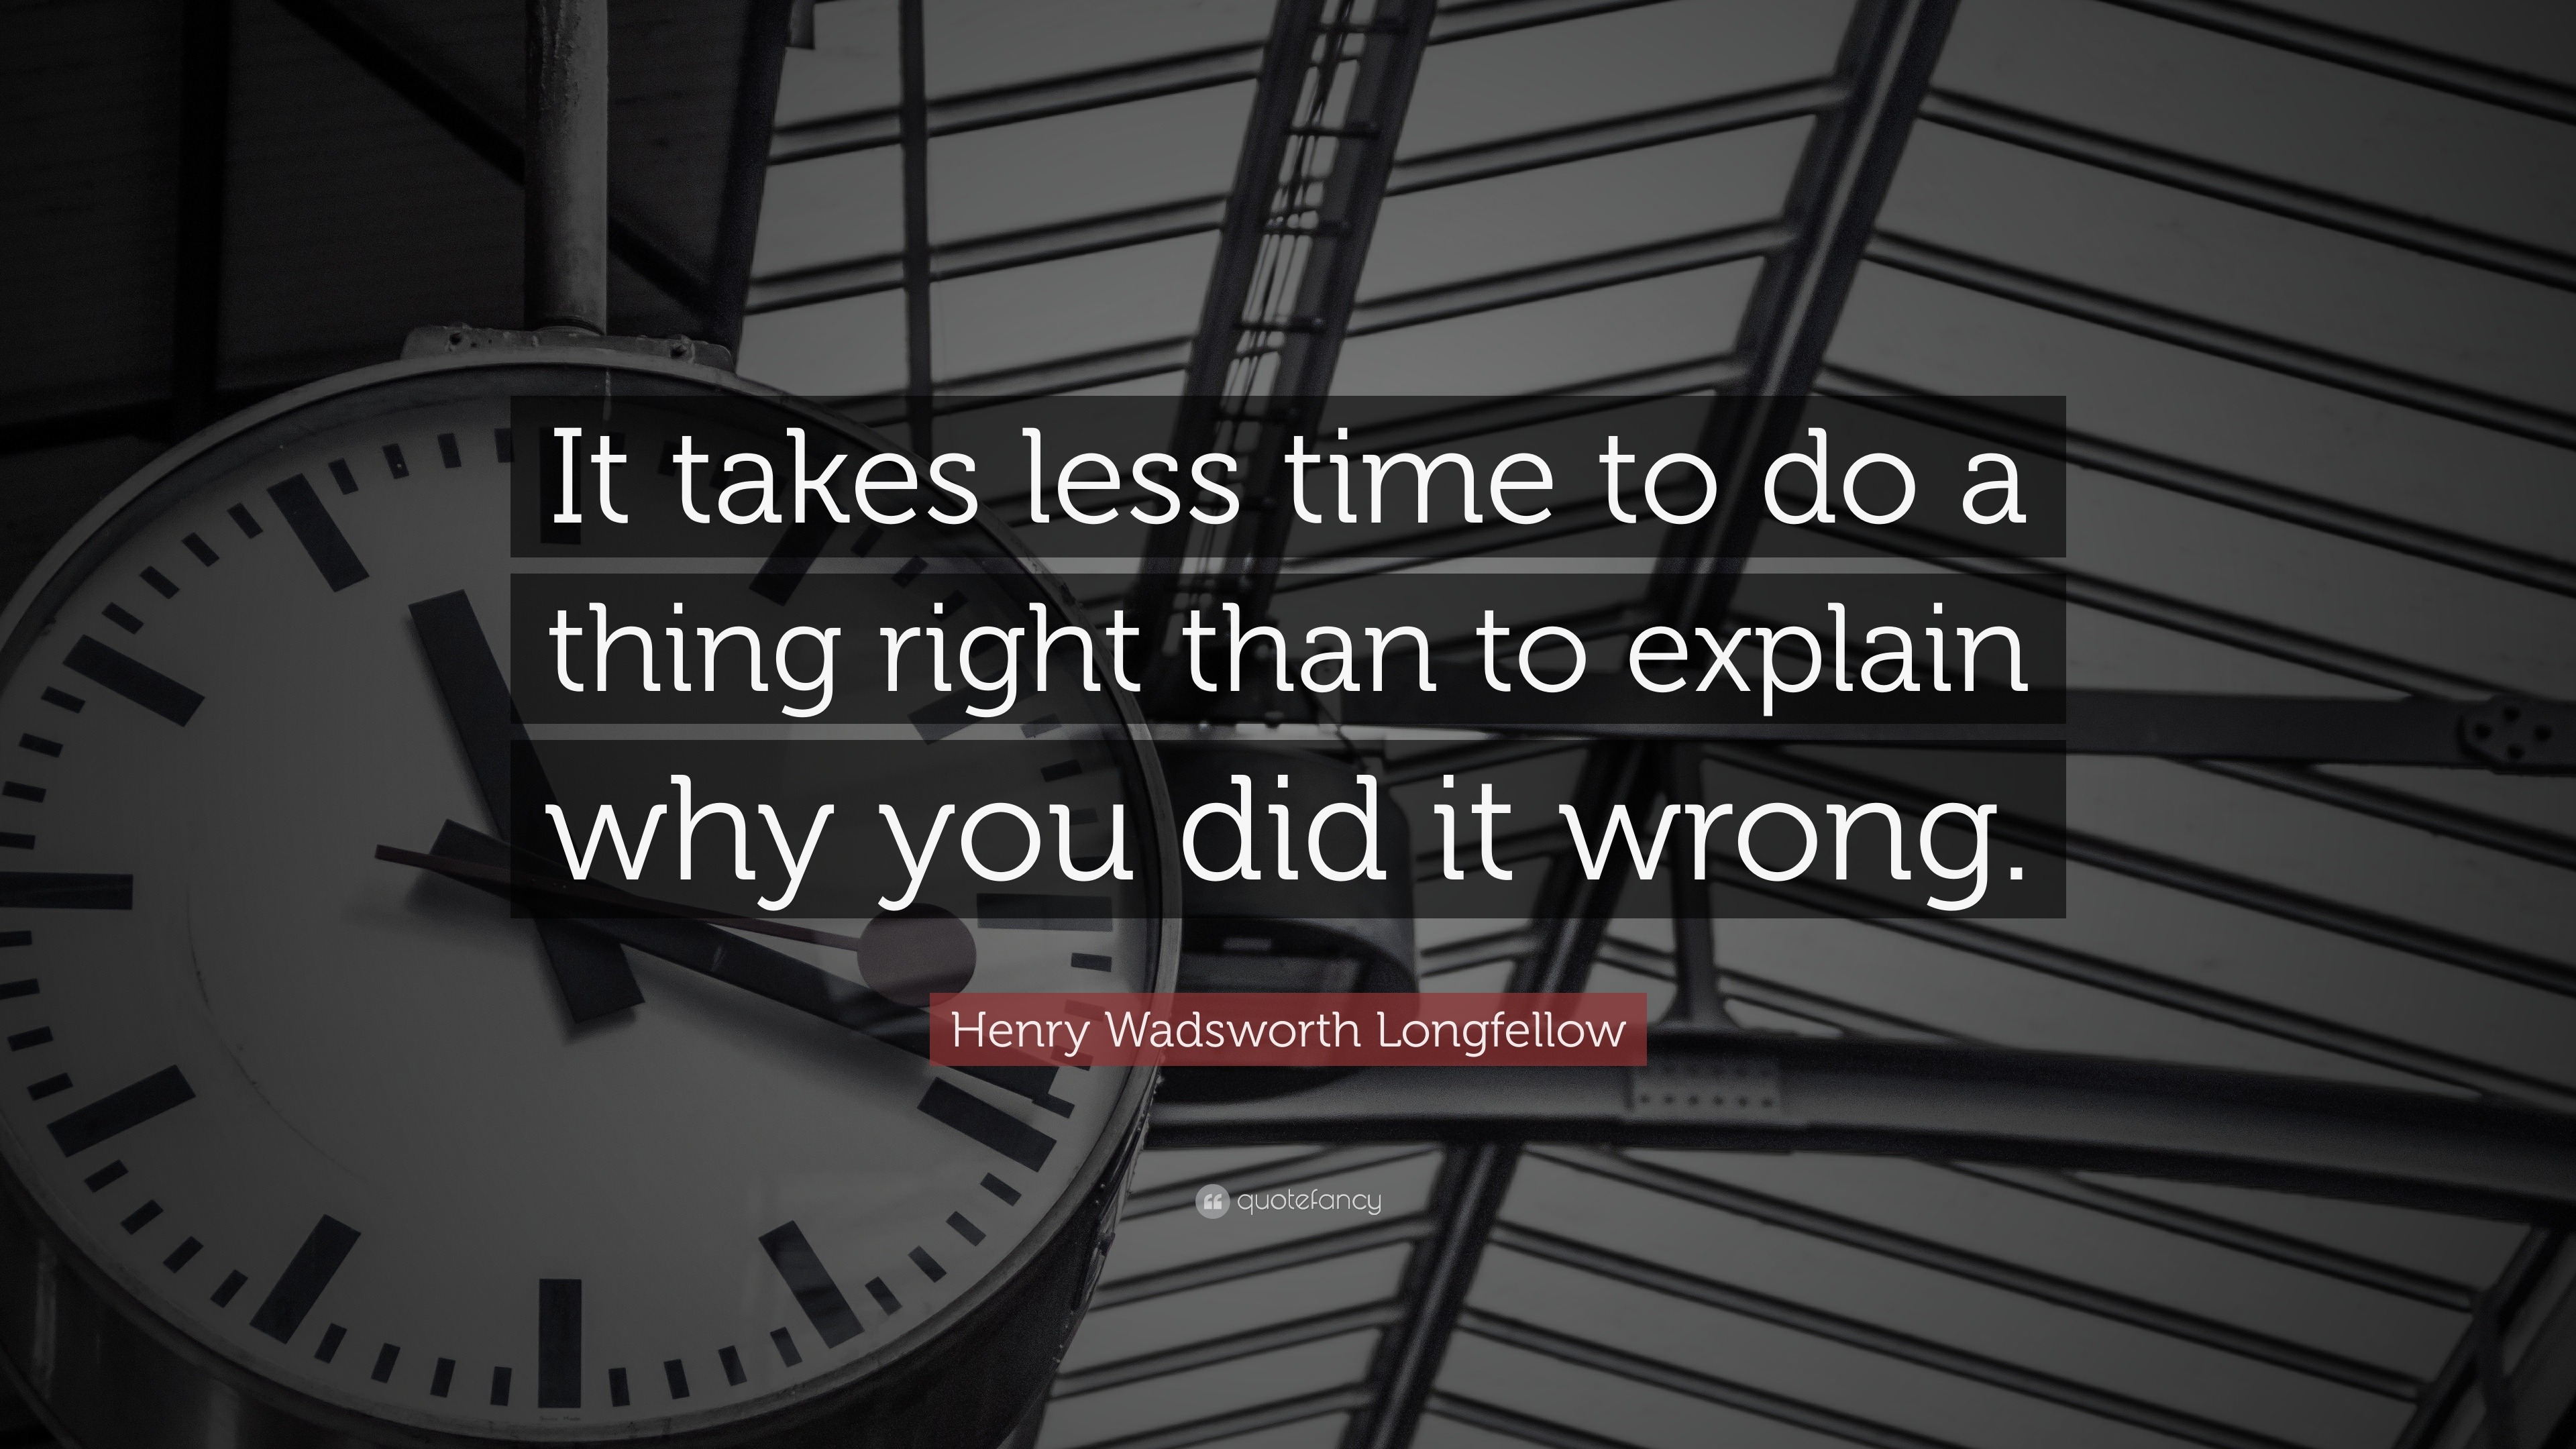 Henry Wadsworth Longfellow Quote “It takes less time to do a thing right than